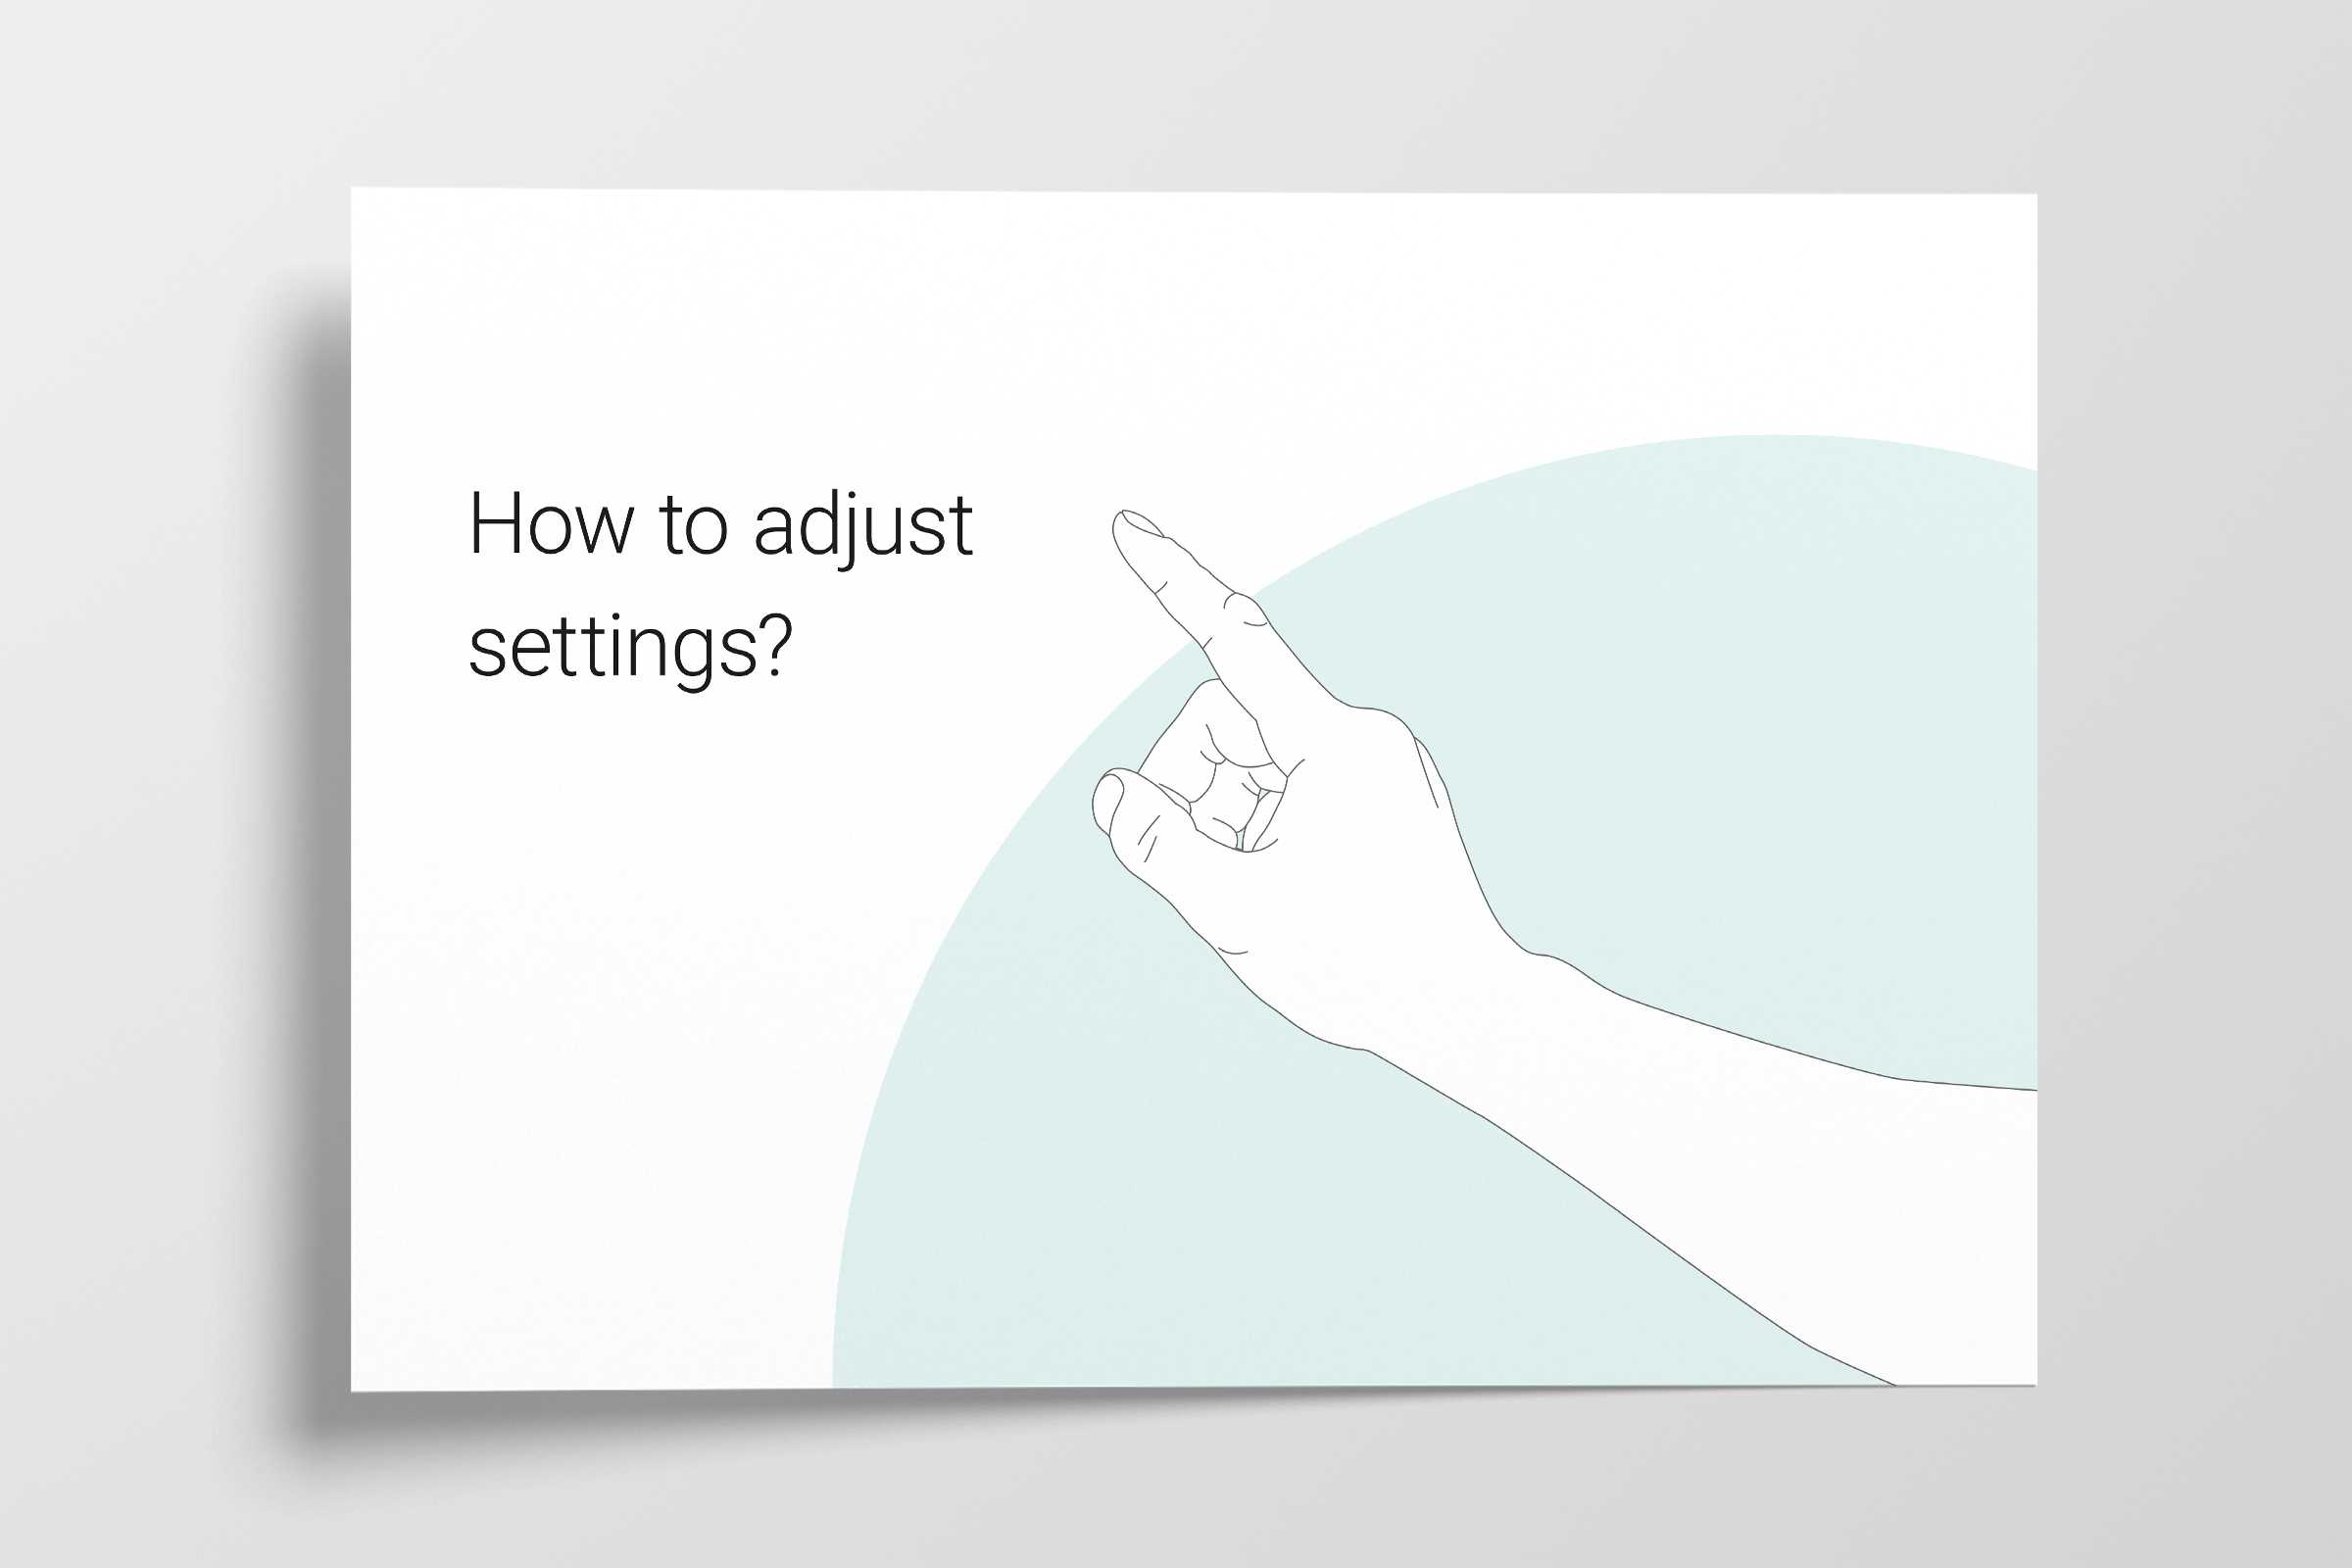 Illustration for the chapter "How to adjust NIV settings?"